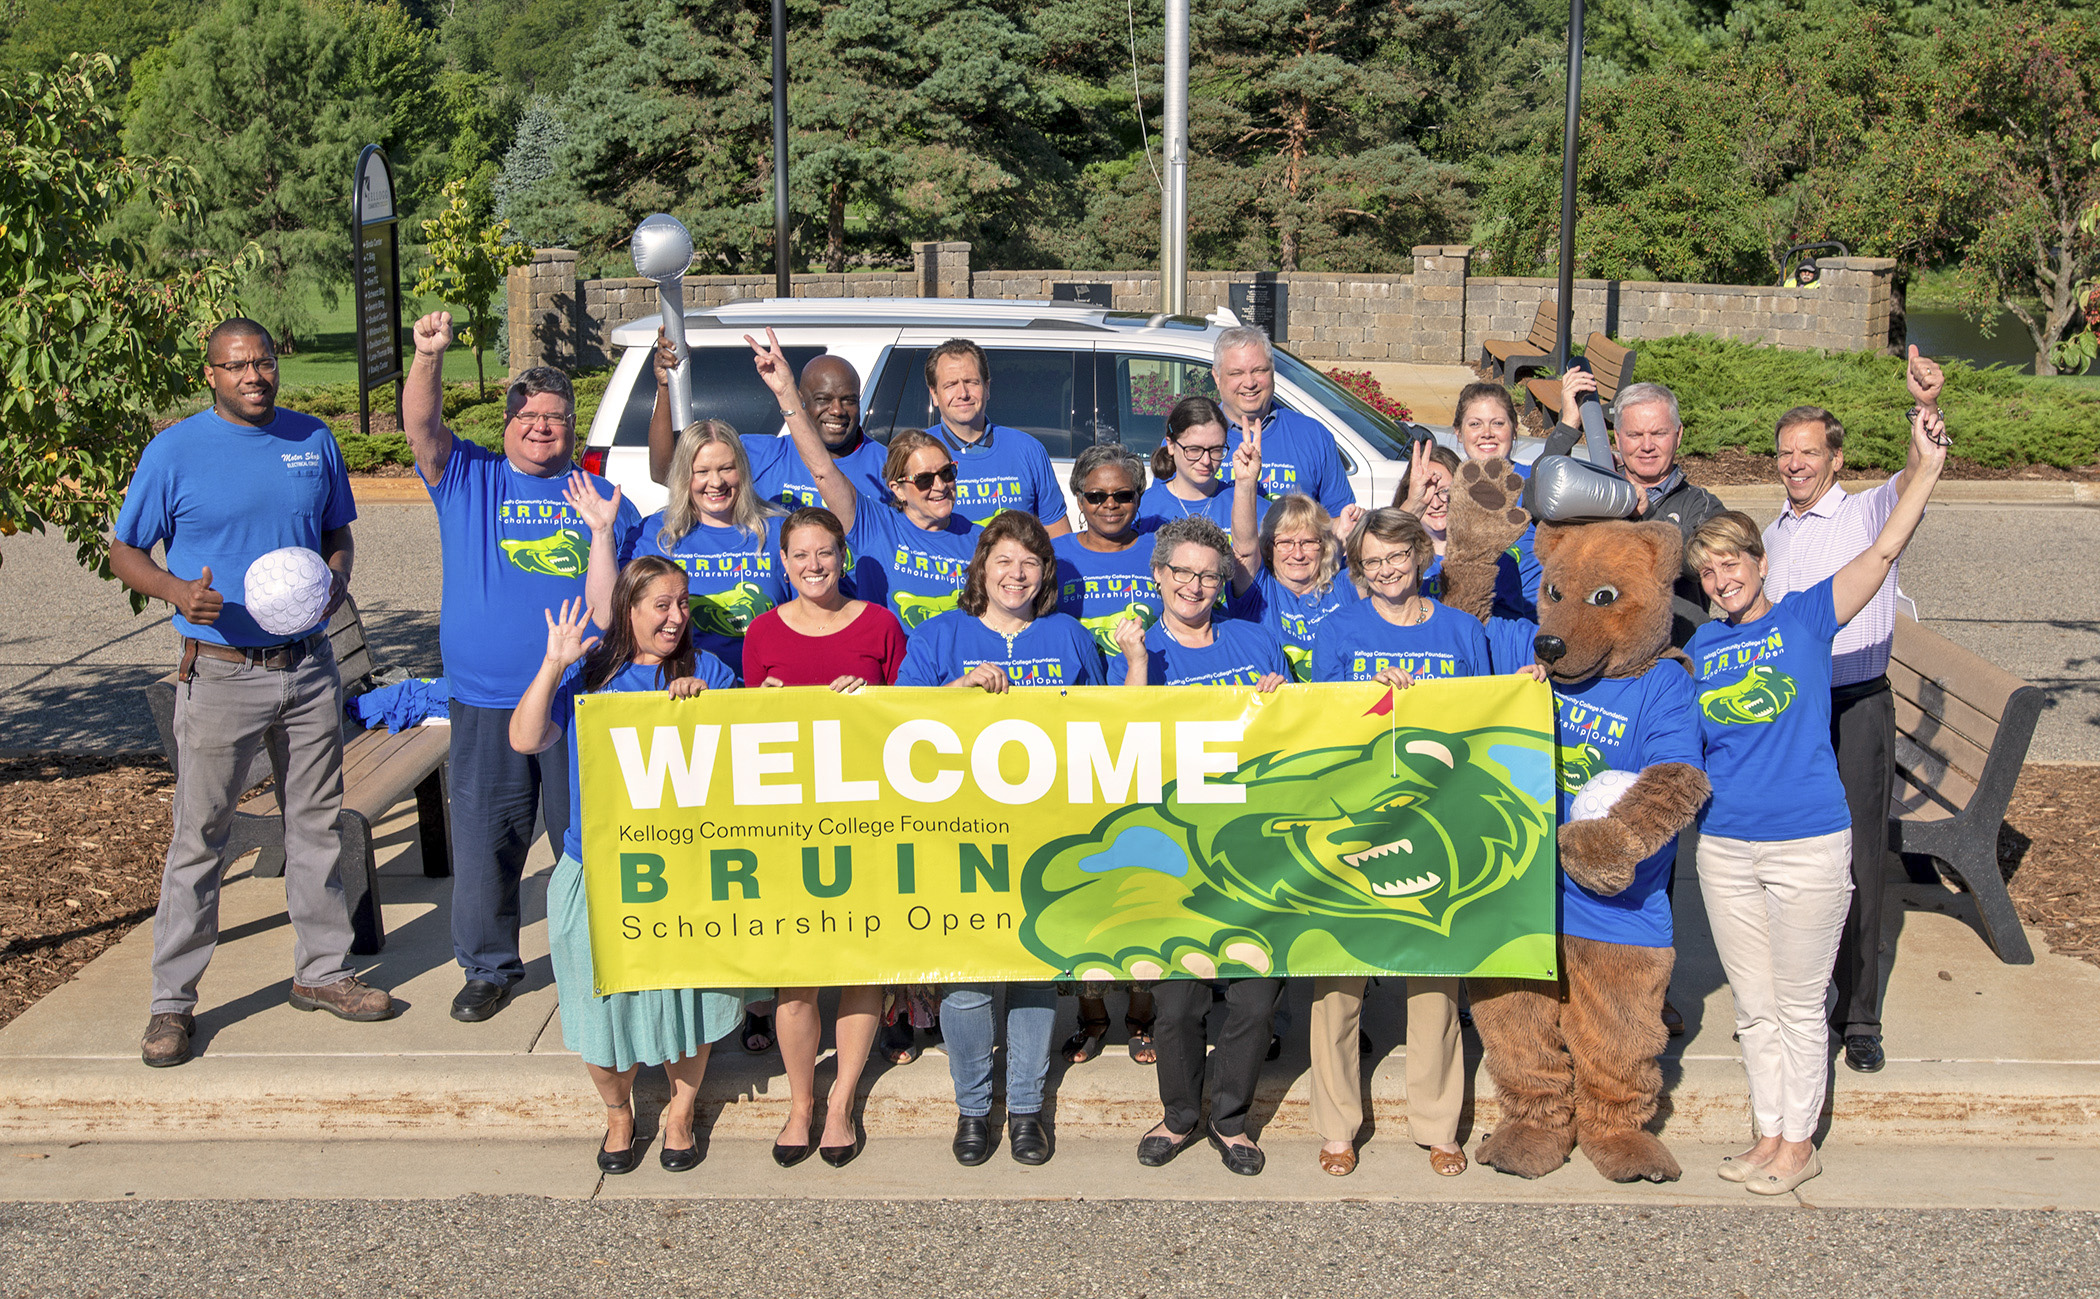 Bruin Scholarship Open organizers and volunteers pose for a group photo on KCC's North Avenue campus in Battle Creek.